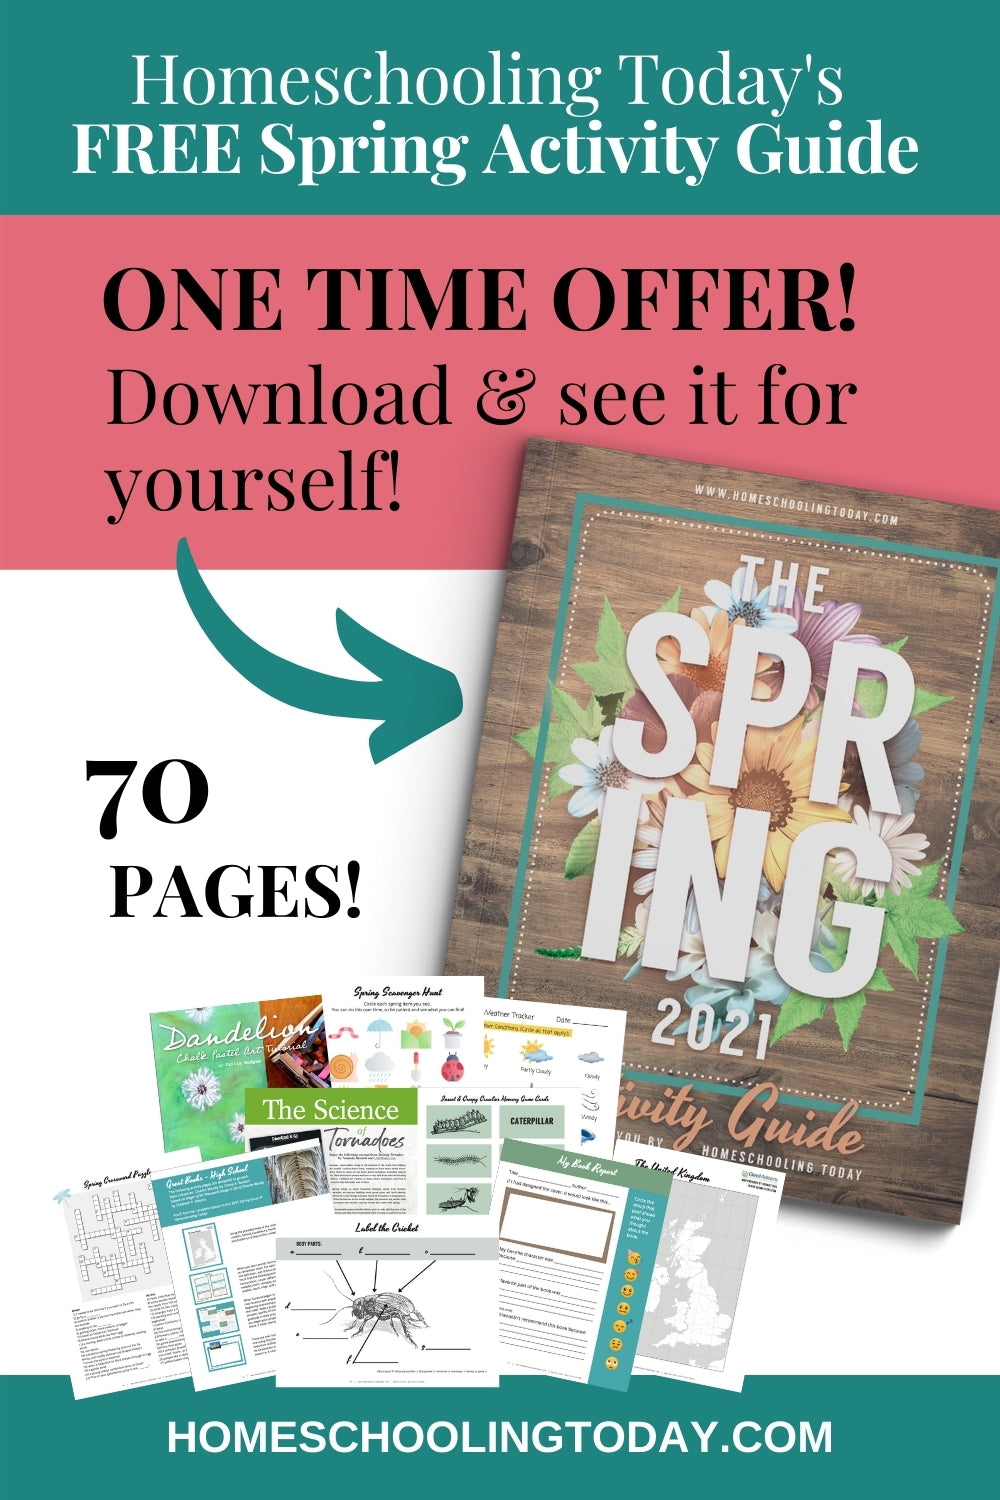 Pinterest pin offer for free spring activity guide